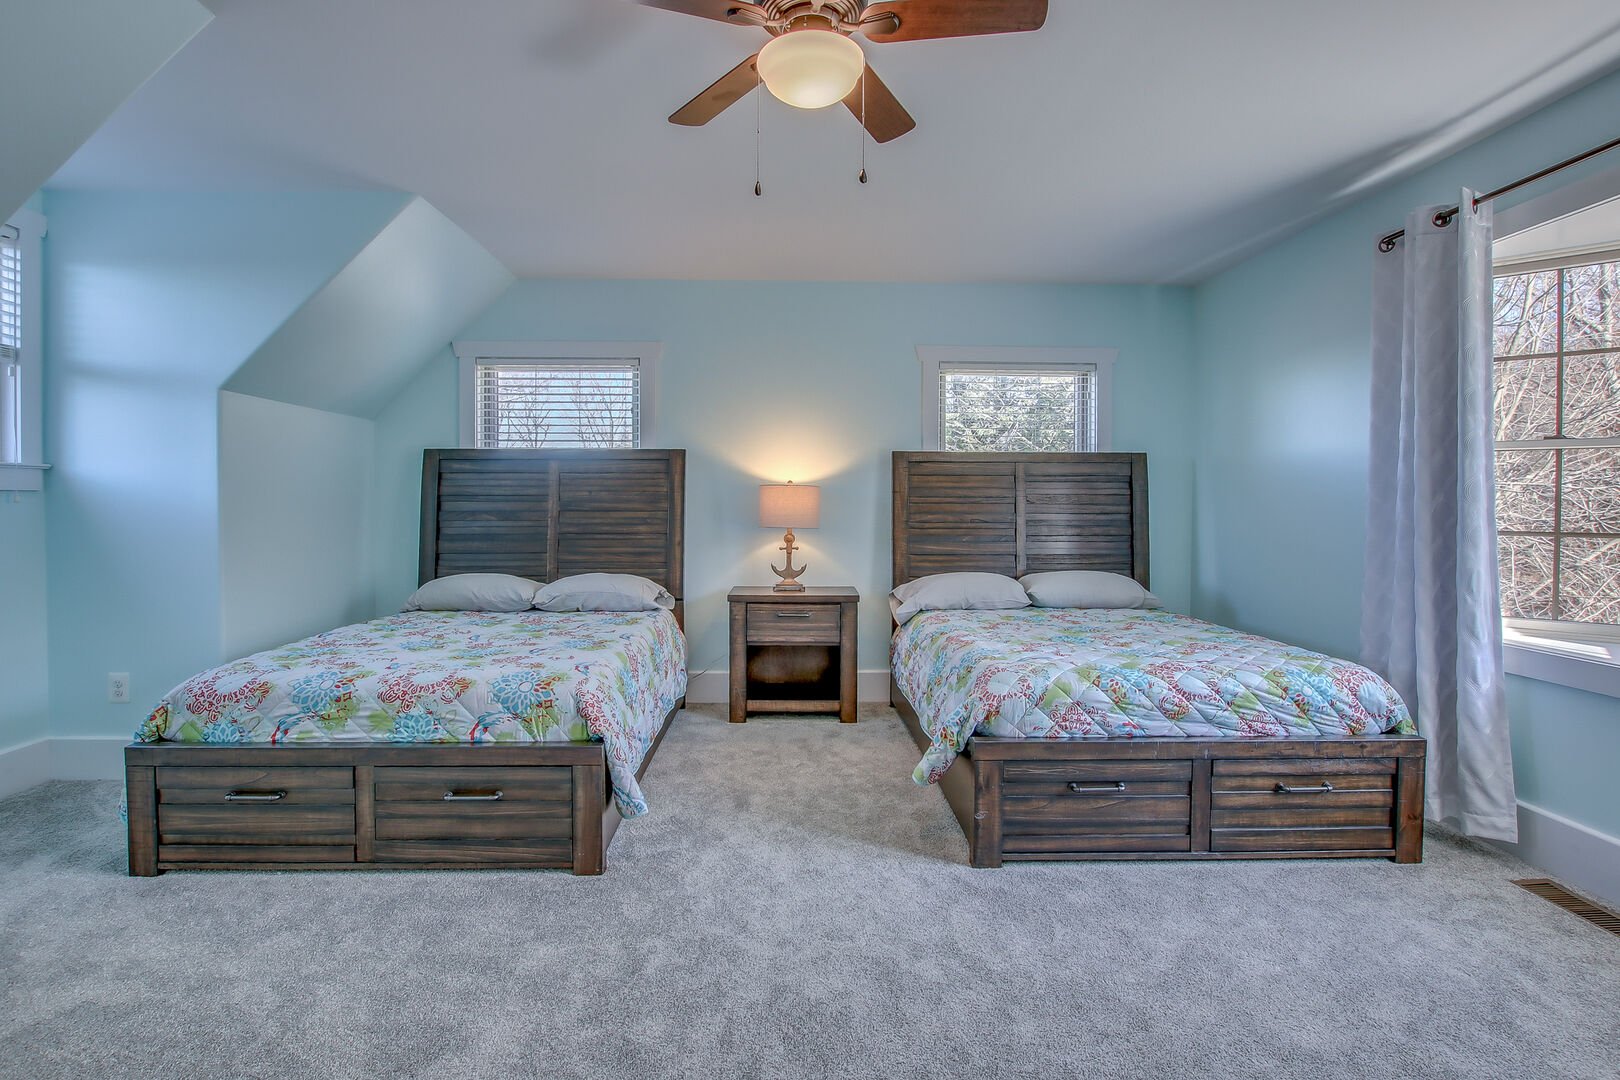 Two side-by-side beds with high headboards, with a nightstand and lamp between them.